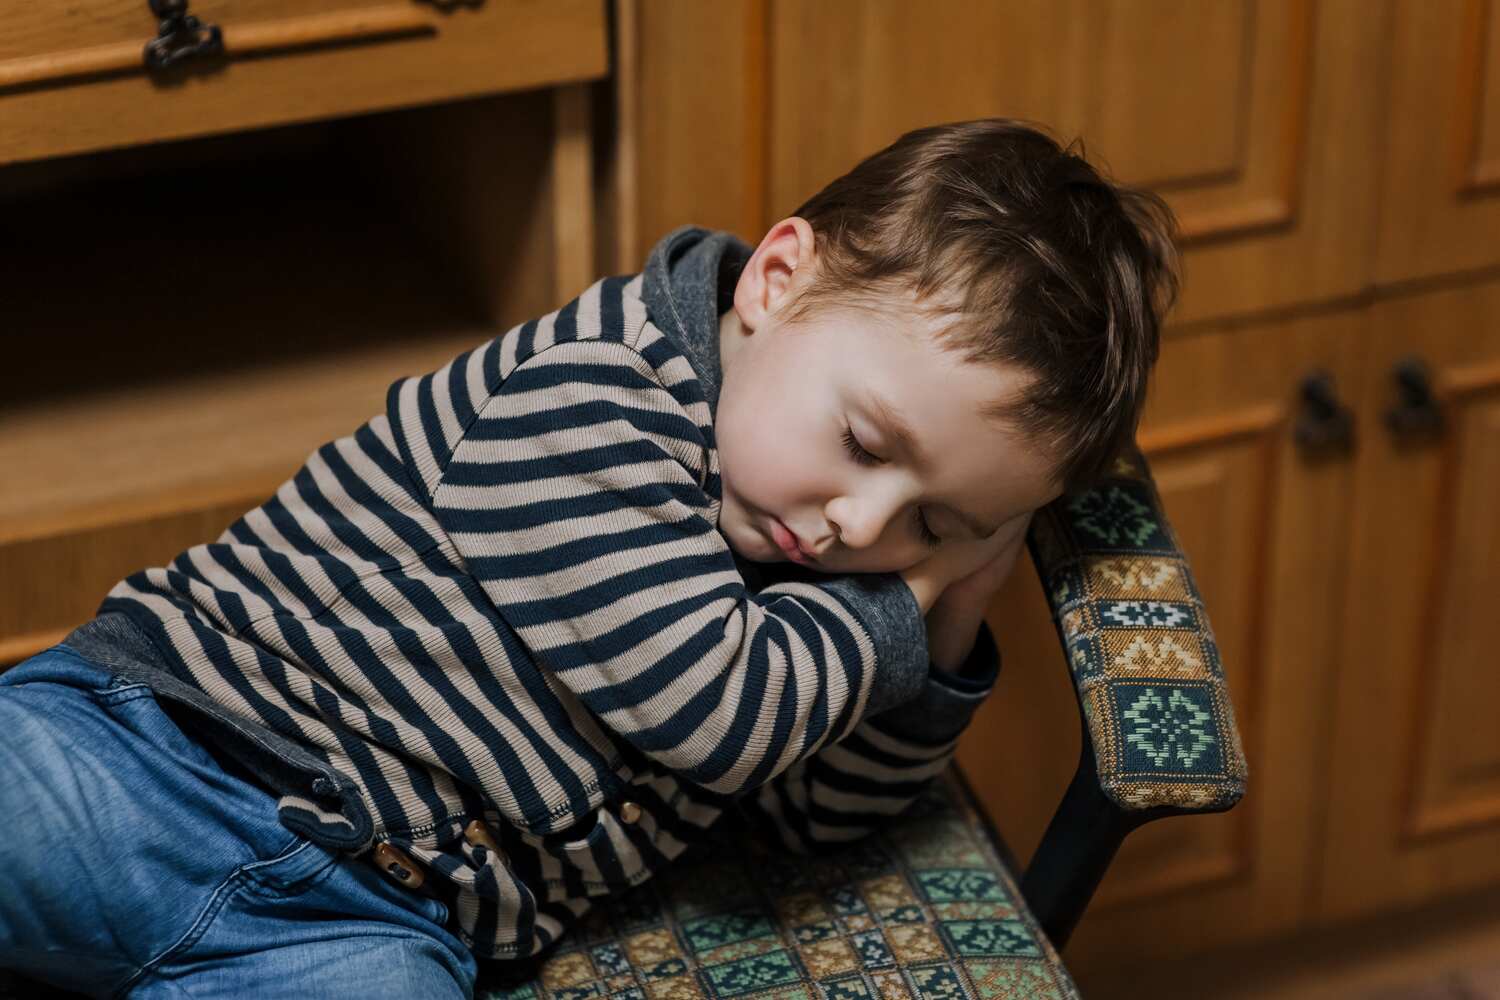 A tired toddler sleeping on chair